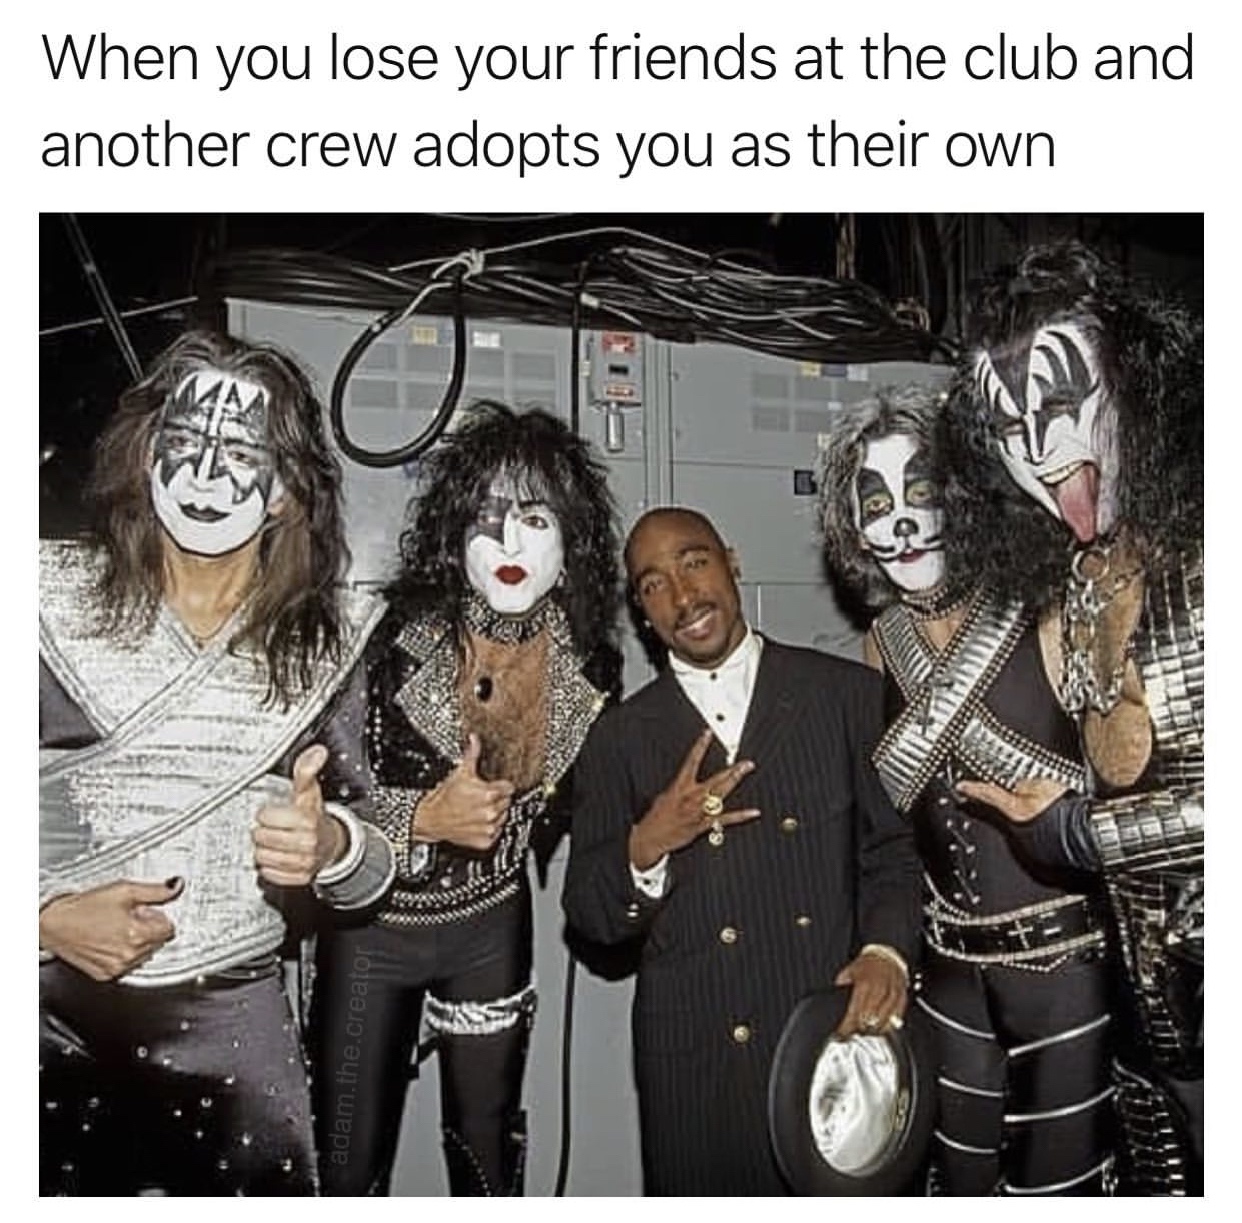 kiss tupac - When you lose your friends at the club and another crew adopts you as their own